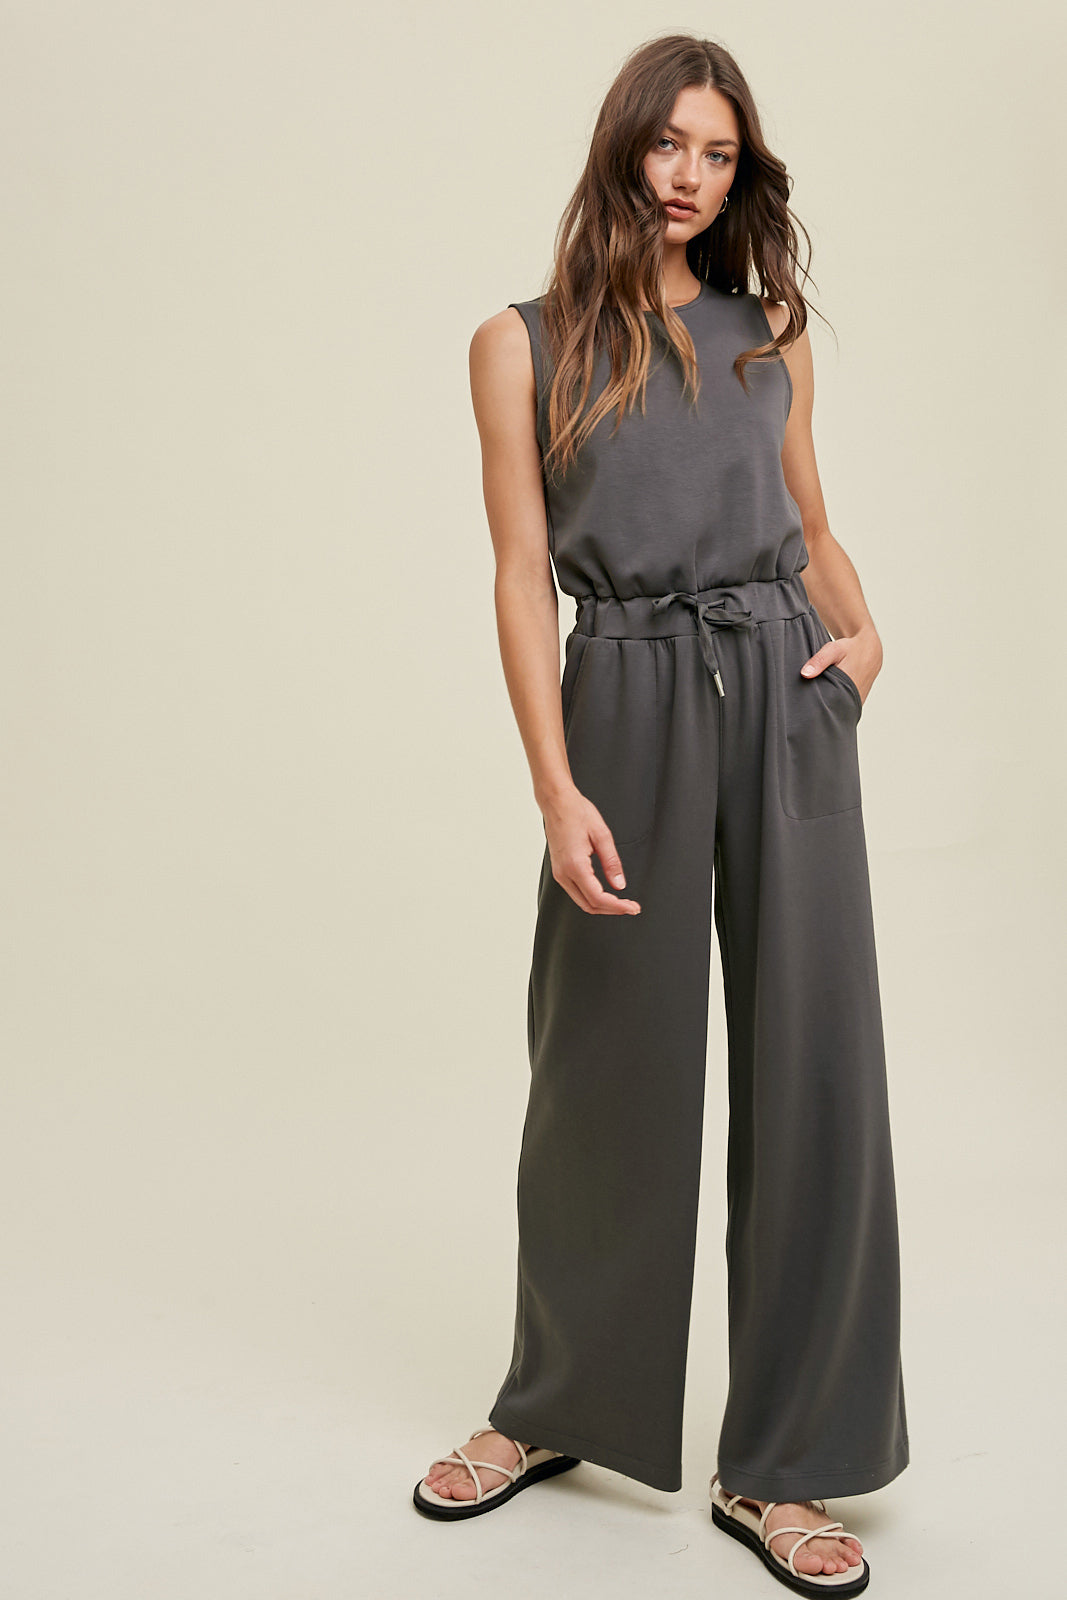 Wide leg Tank jumpsuit 40%off use code sale40 at checkout